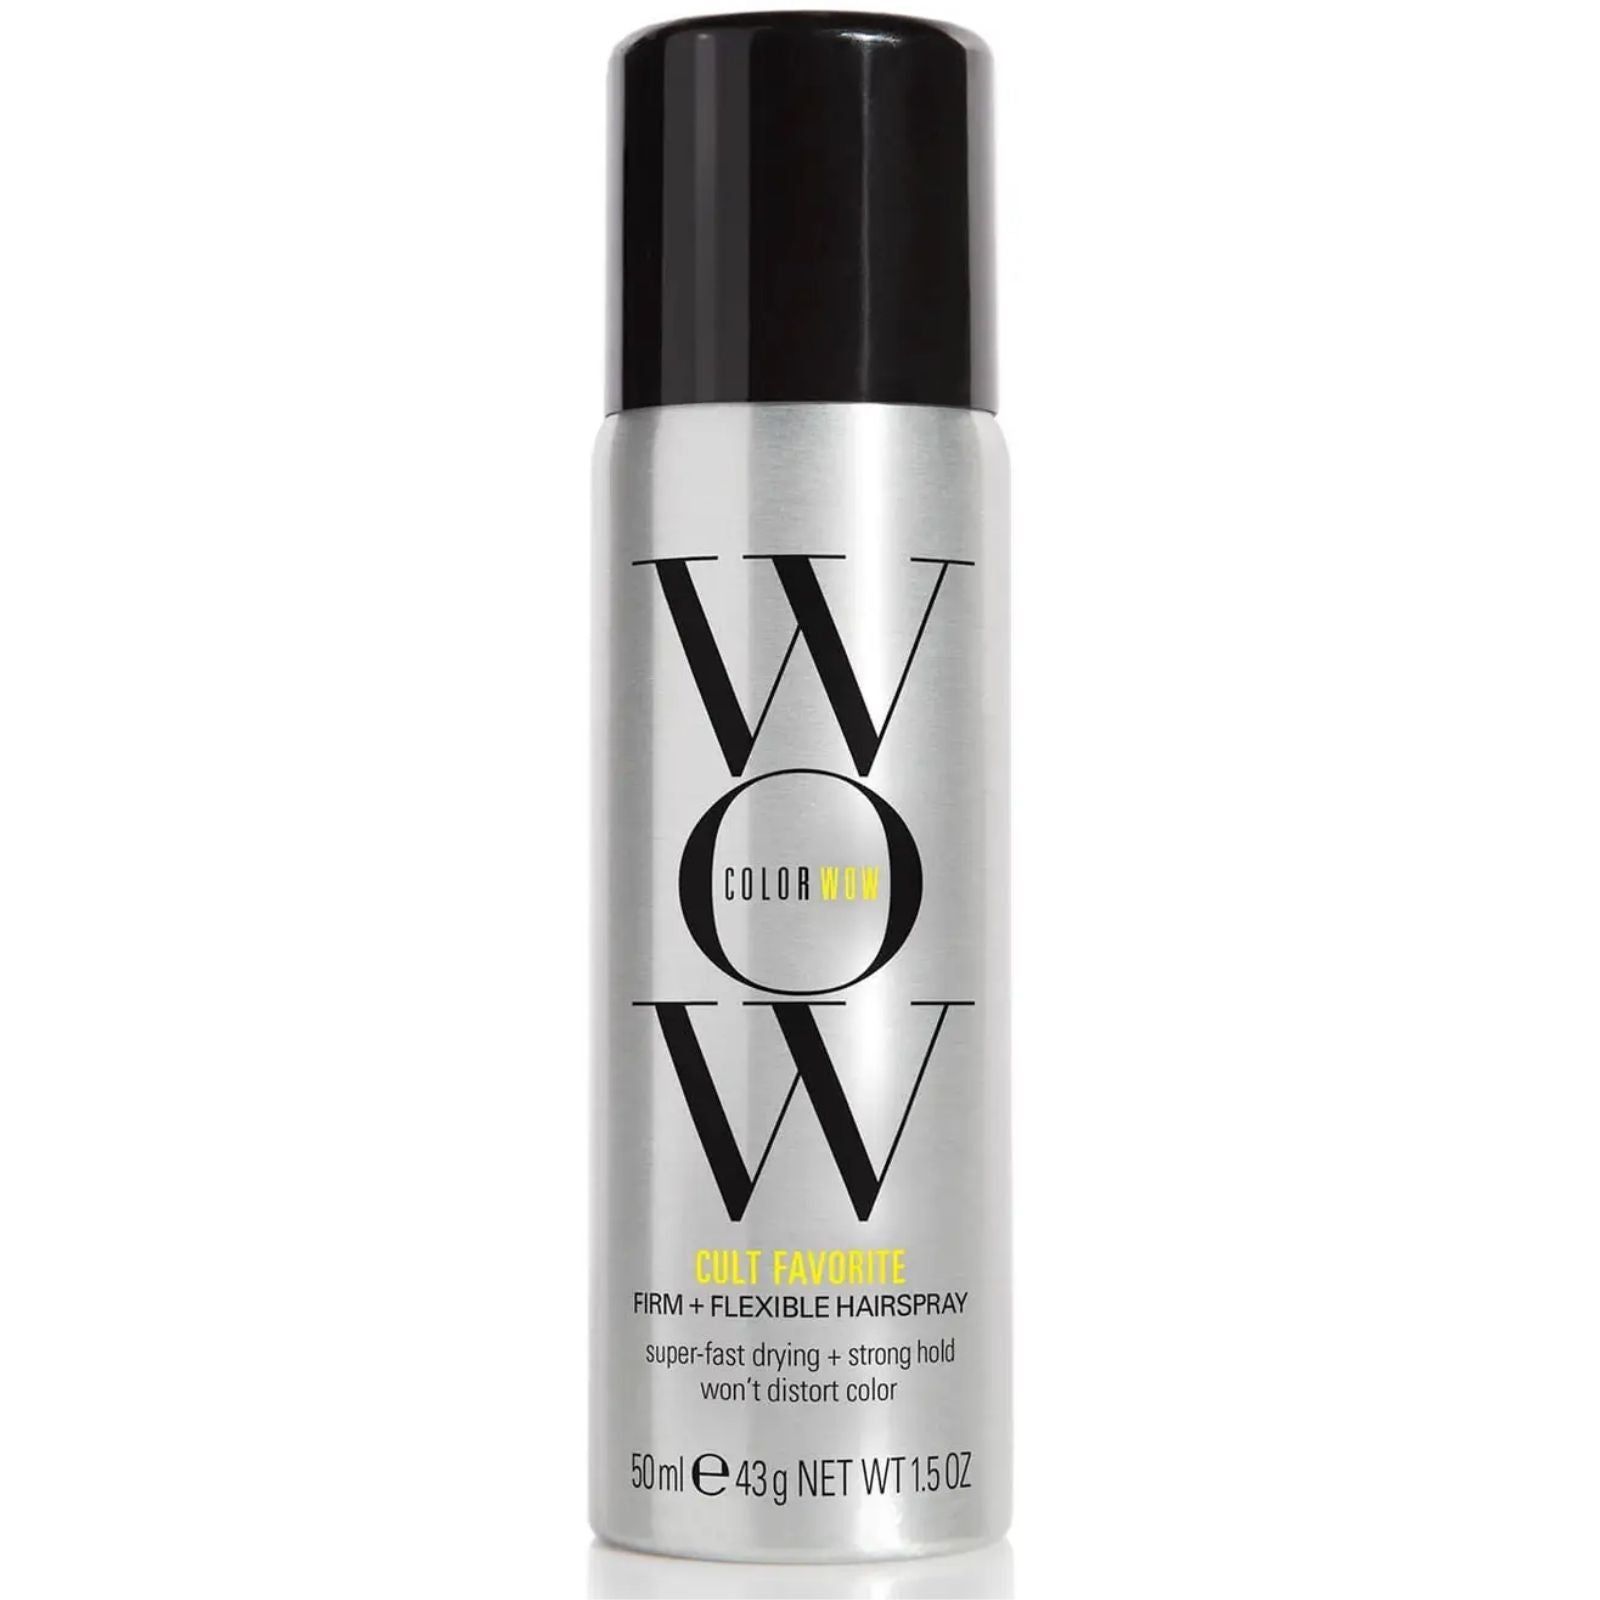 Color Wow Color Wow | Cult Favorite Firm Flexible Hairspray | 50ML - SkinShop